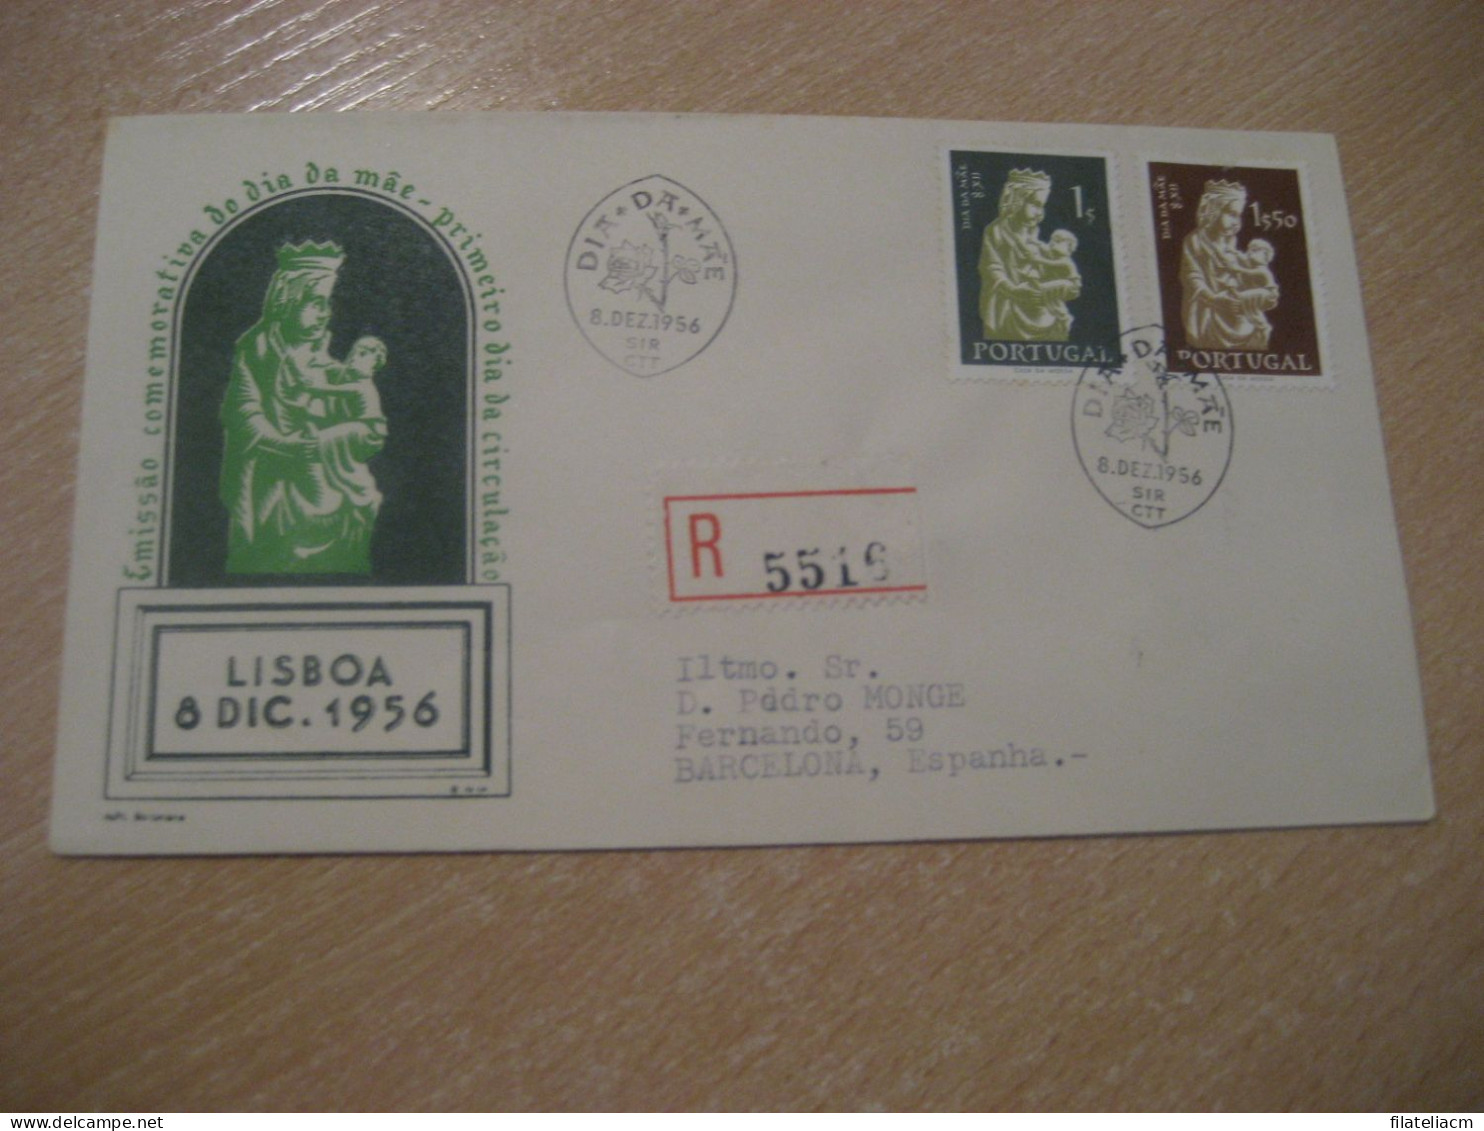 CTT SIR Lisboa 1956 To Barcelona Spain Dia Da Mare Virgin Vierge Religion FDC Cancel Registered Cover PORTUGAL - Covers & Documents